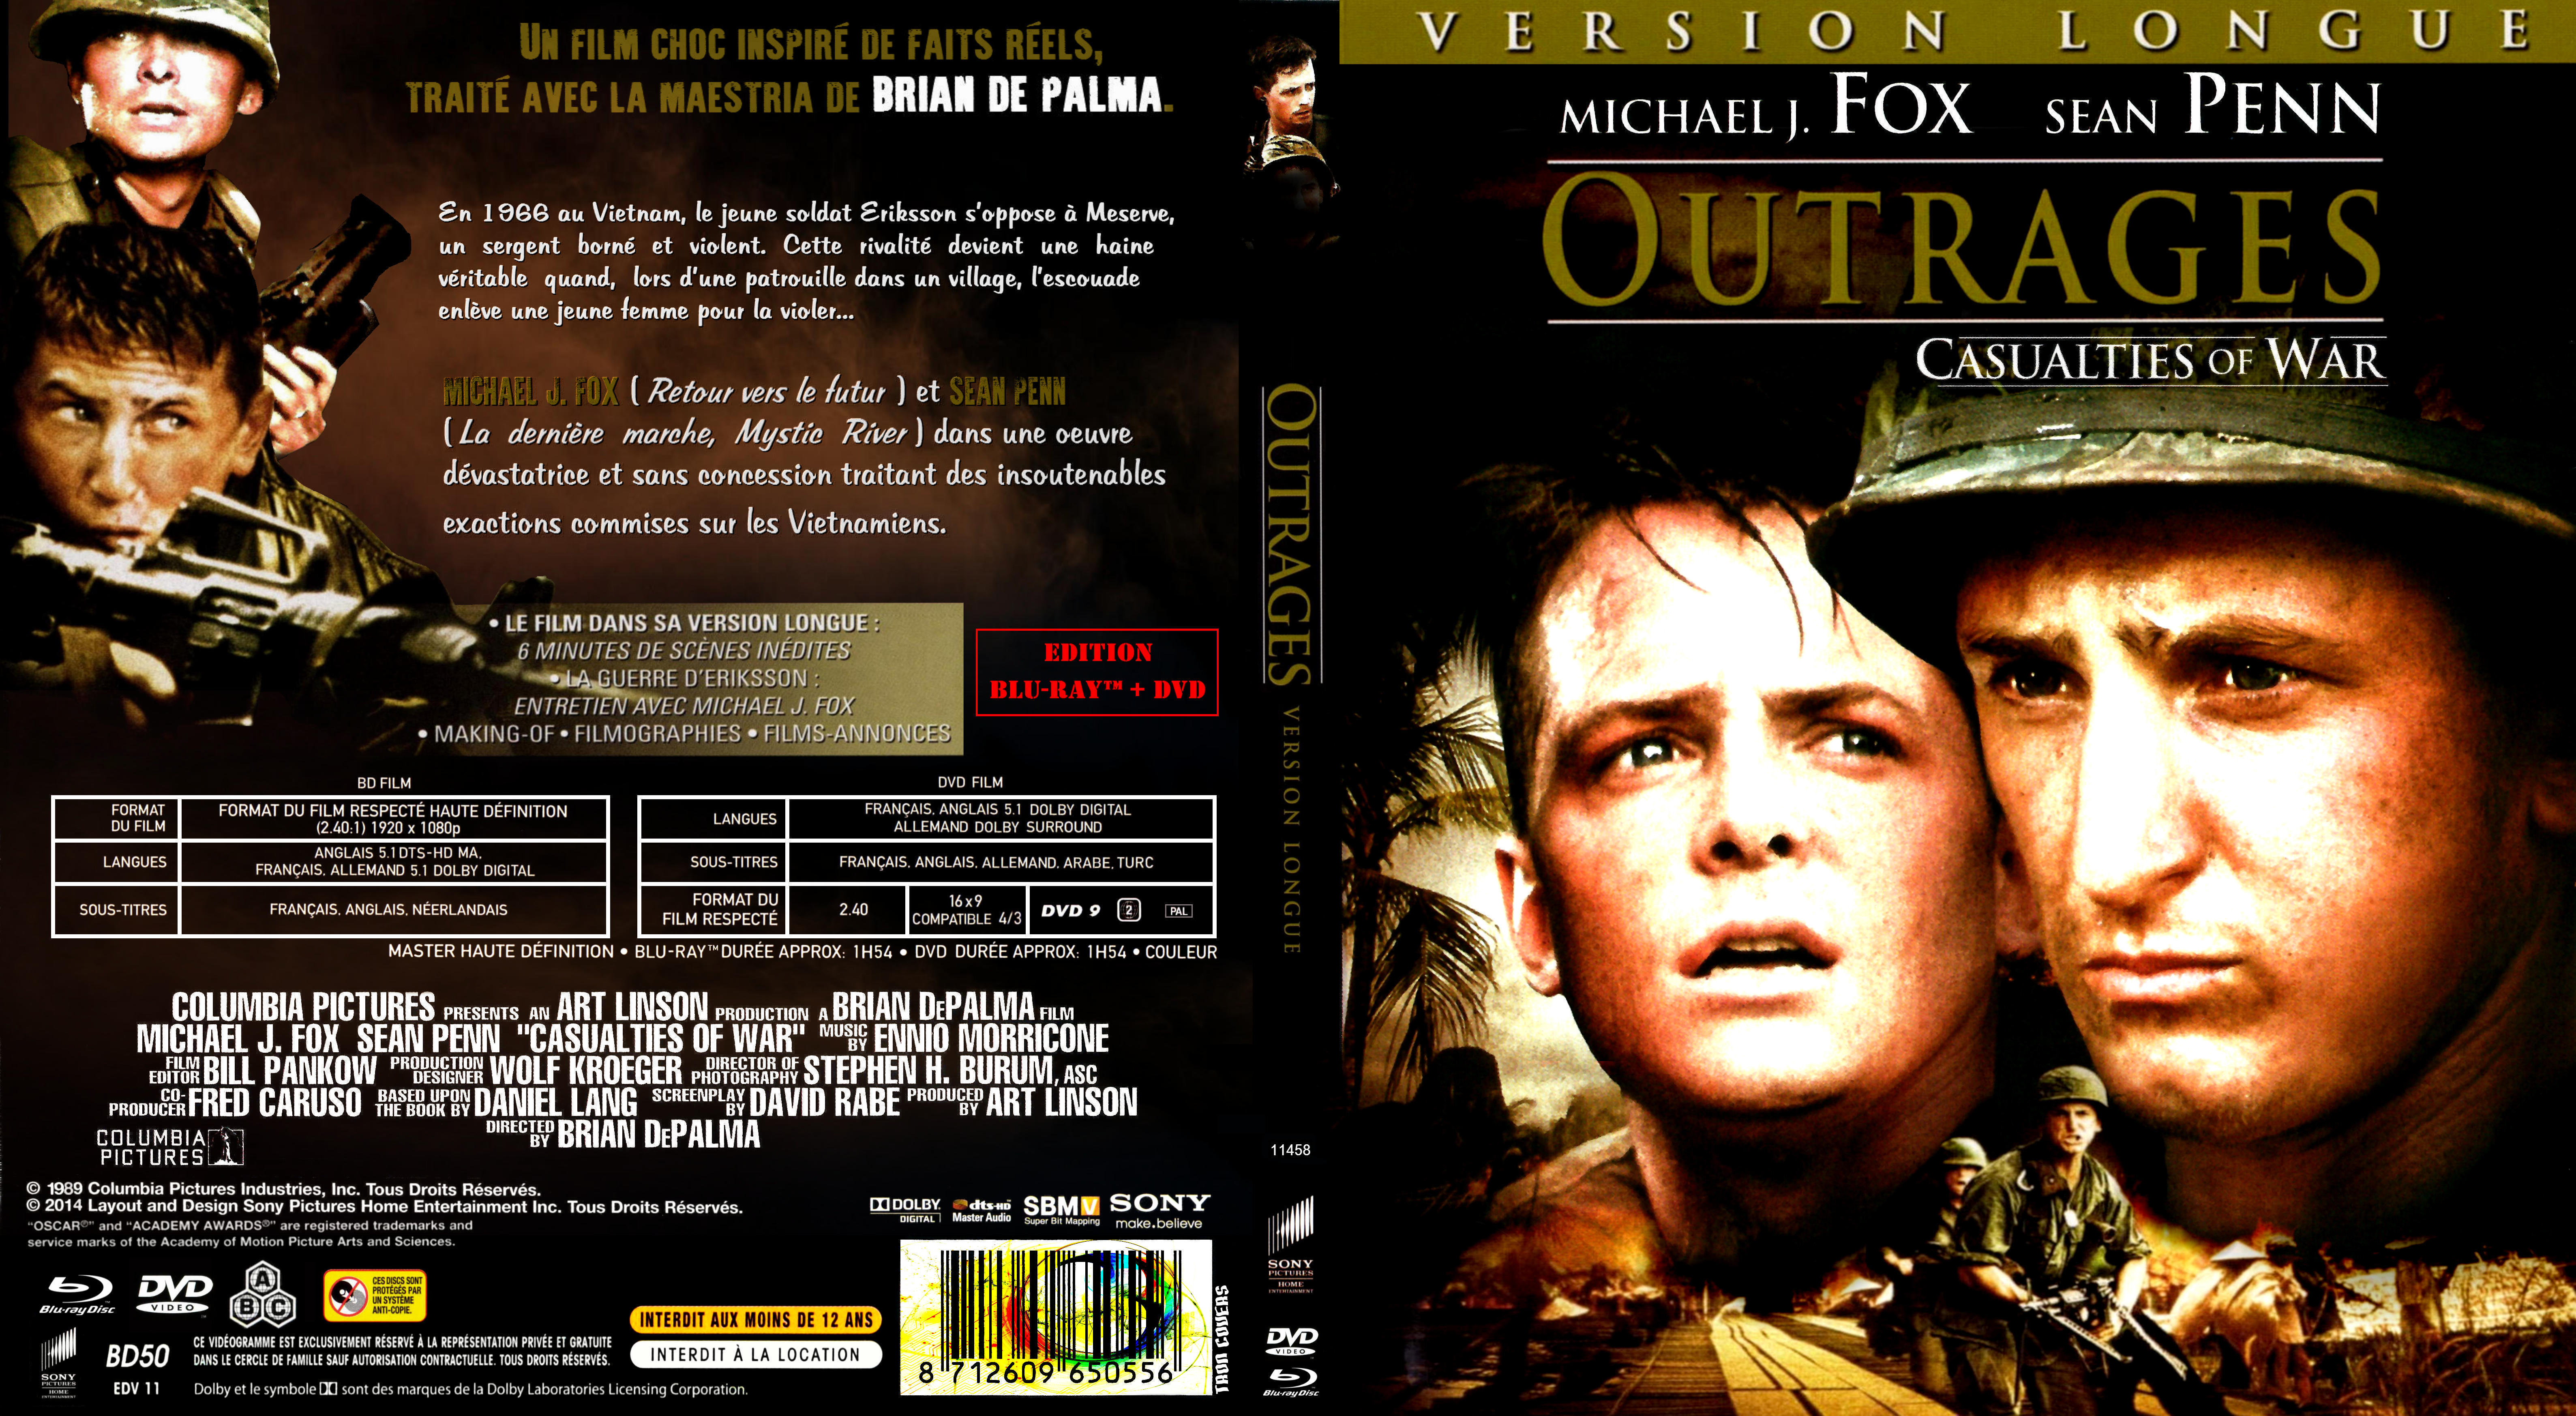 Jaquette DVD Outrages custom (BLU-RAY)